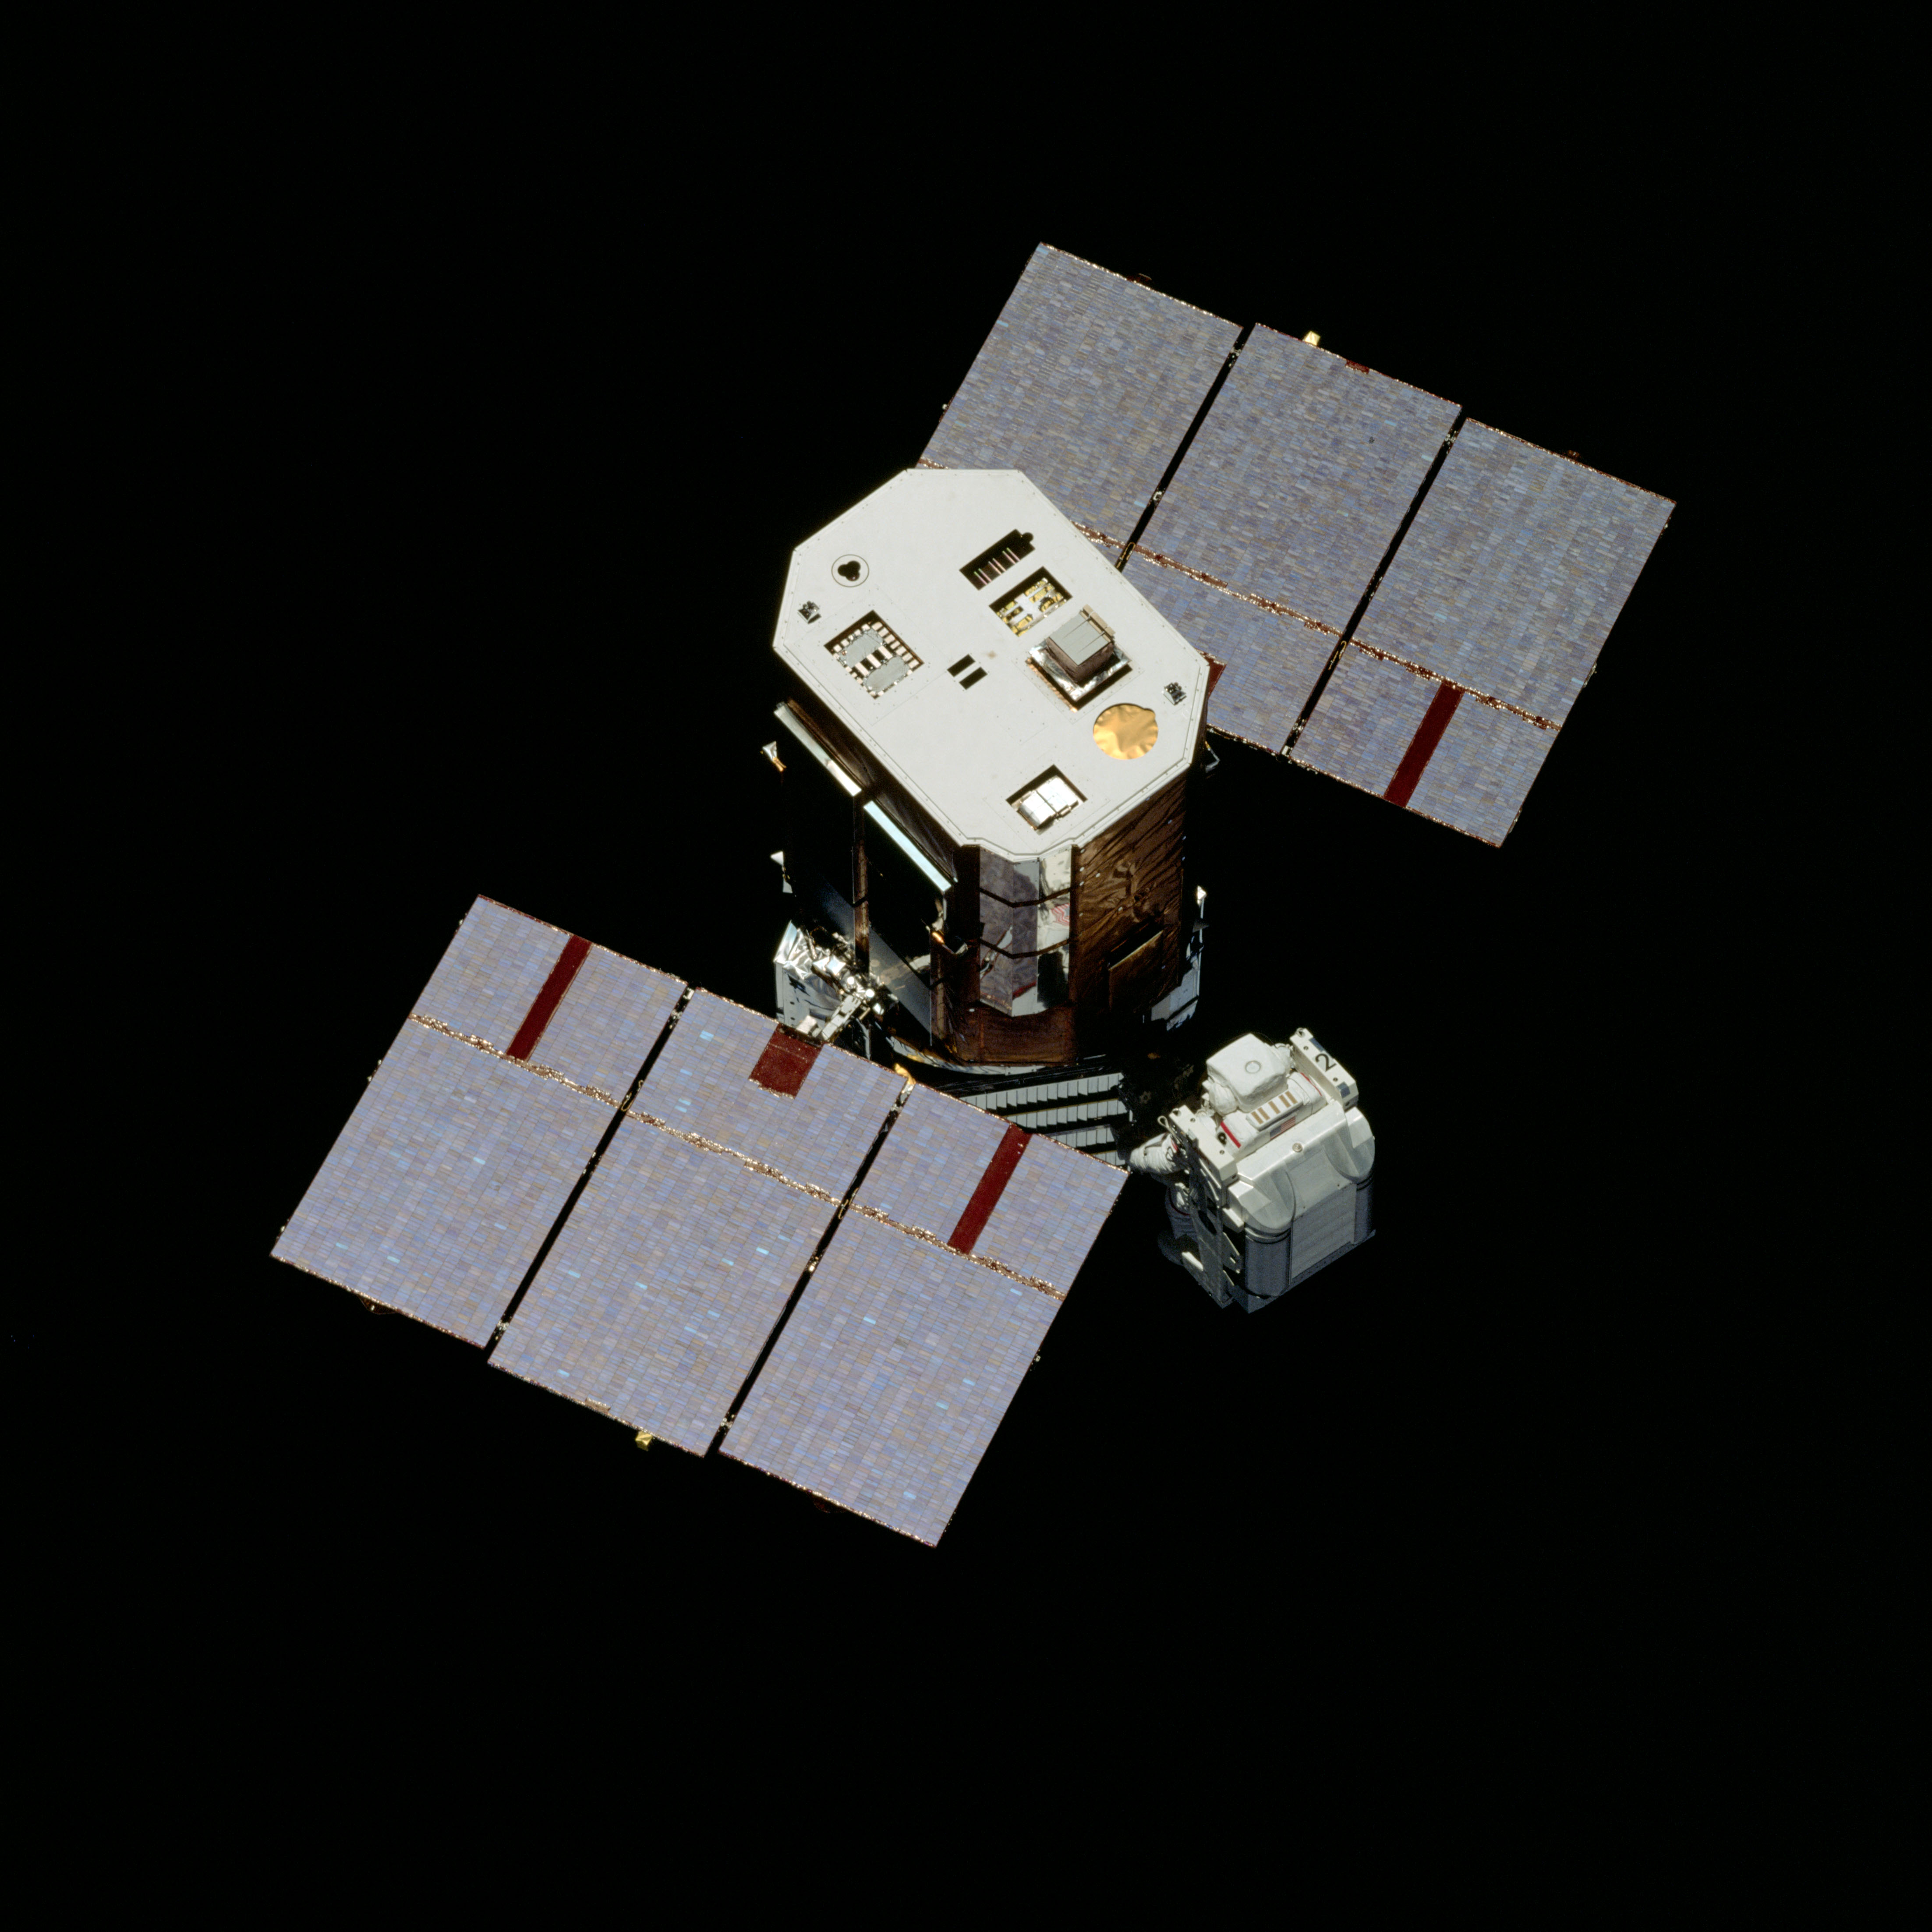 Nelson prepares for the first docking attempt with Solar Max